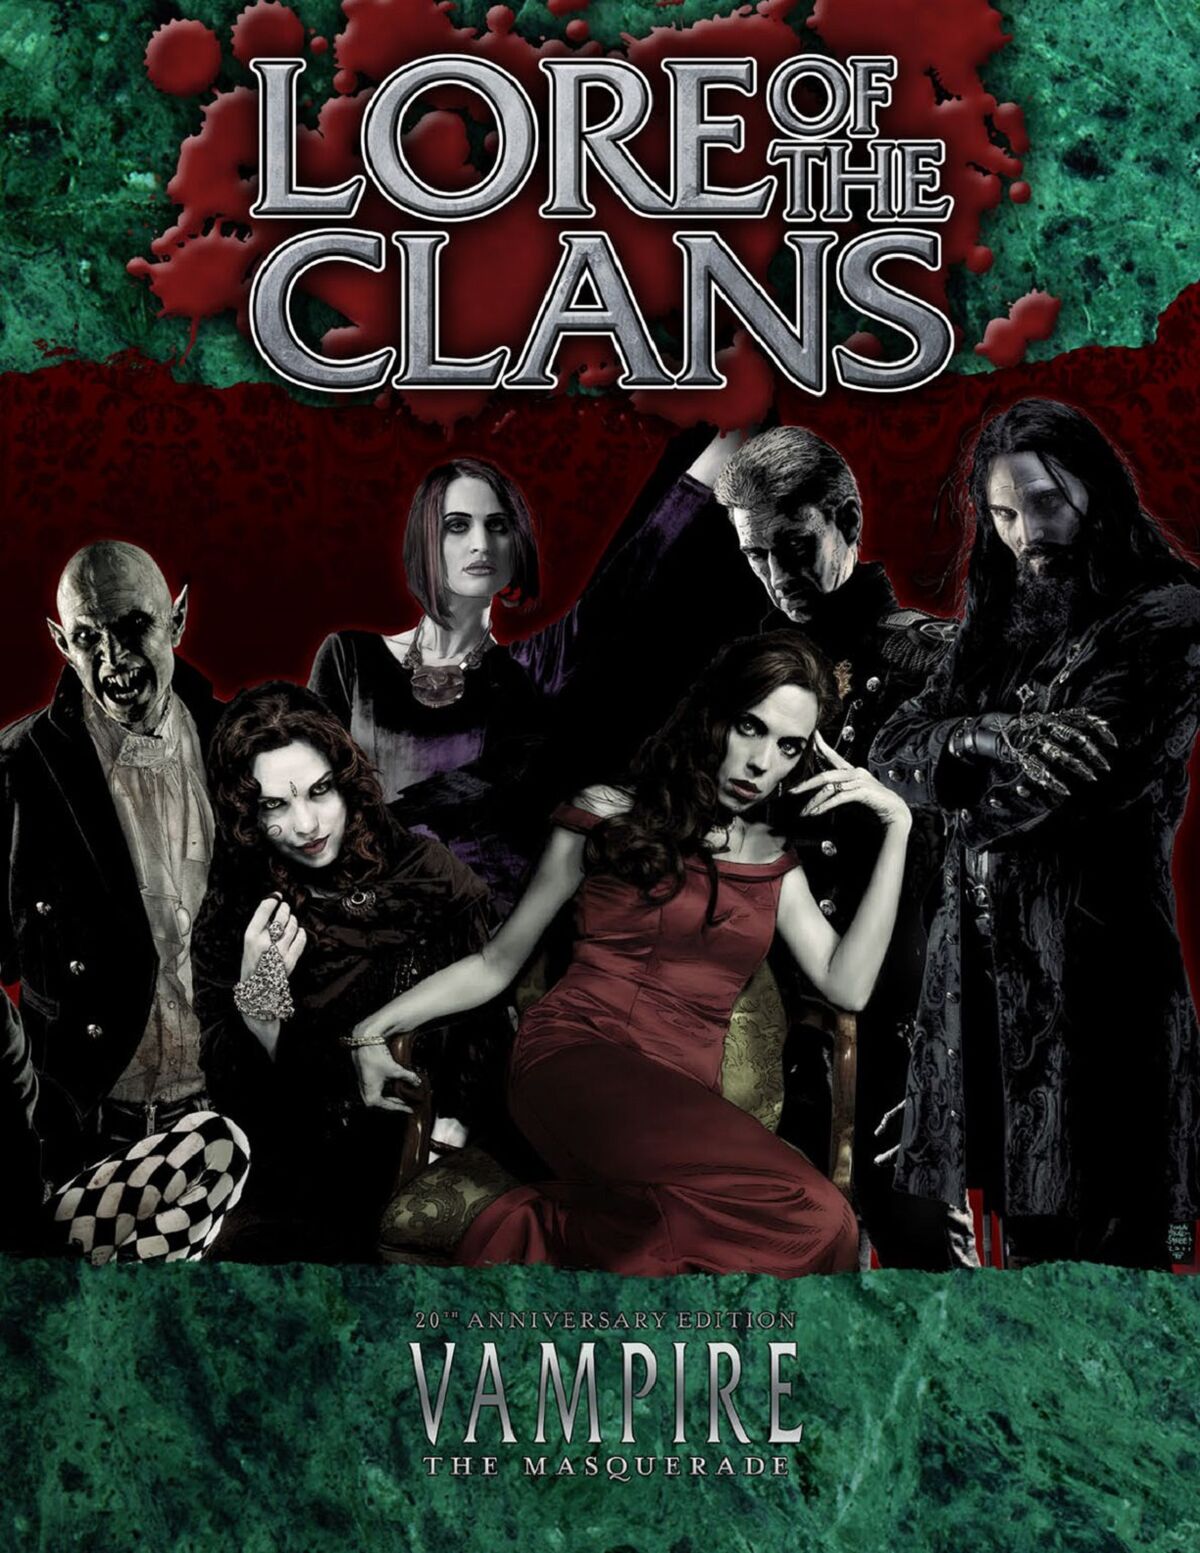 Ranking The 13 Clans in Vampire: The Masquerade, by Daniel Mayfair